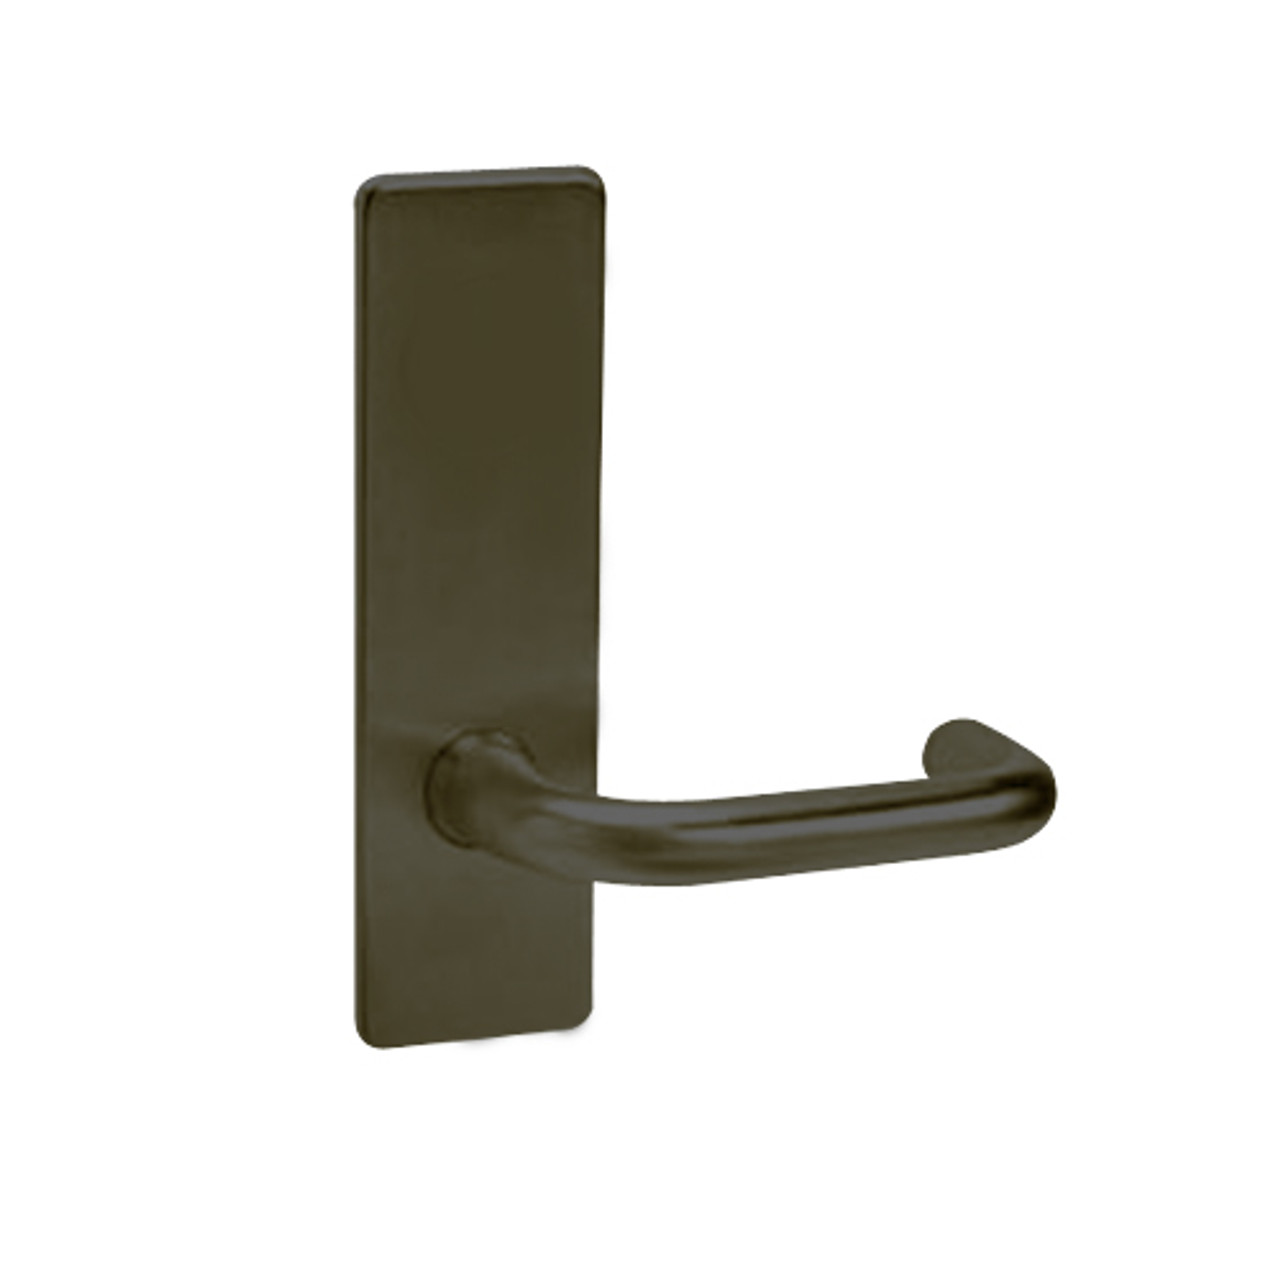 ML2030-LWR-613-M31 Corbin Russwin ML2000 Series Mortise Privacy Locksets with Lustra Lever in Oil Rubbed Bronze